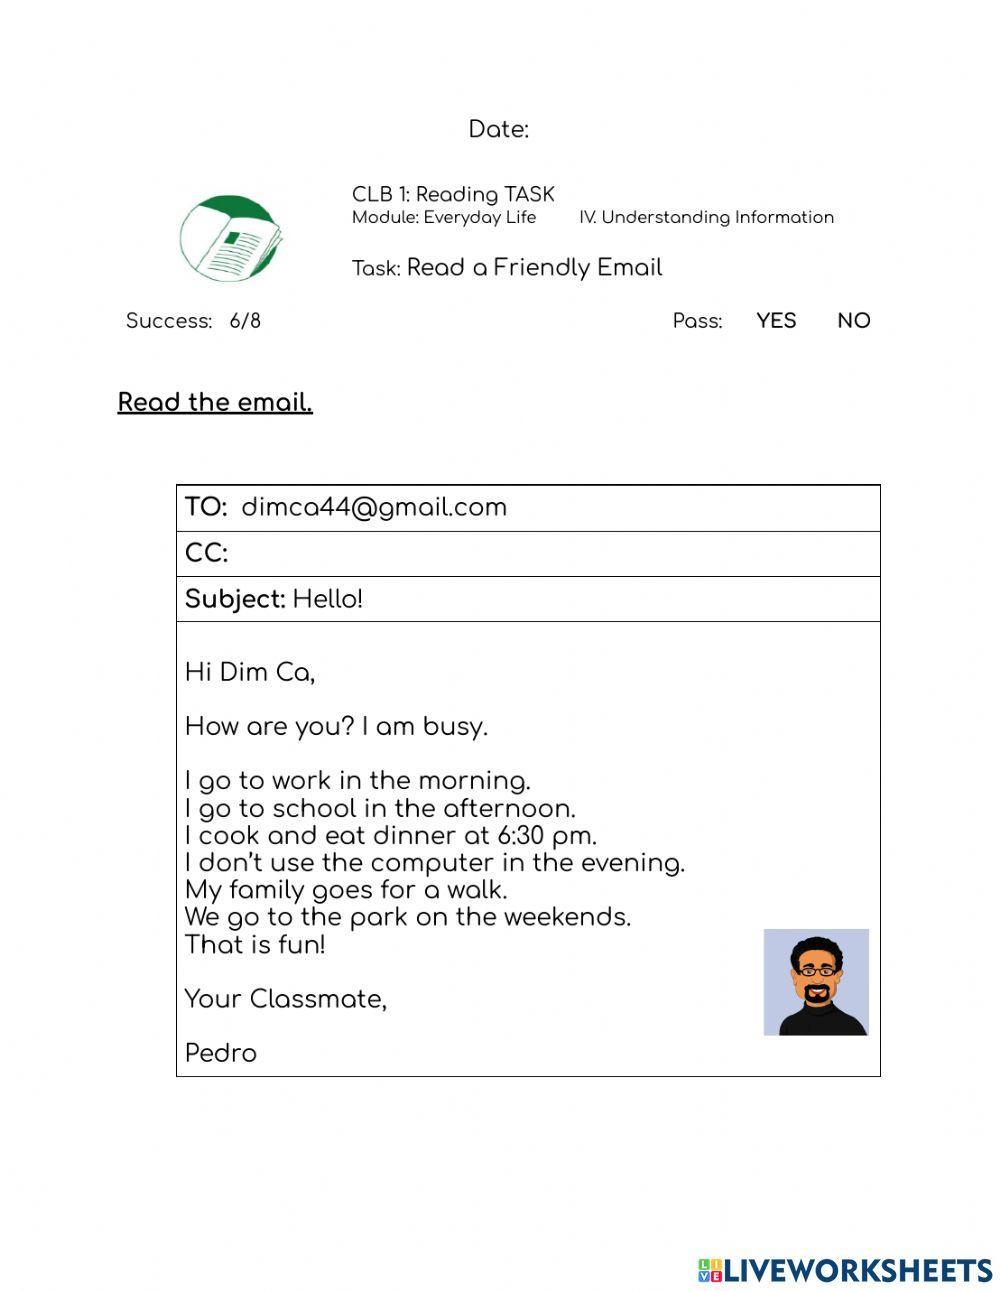 CLB 1: Reading Friendly Email TASK